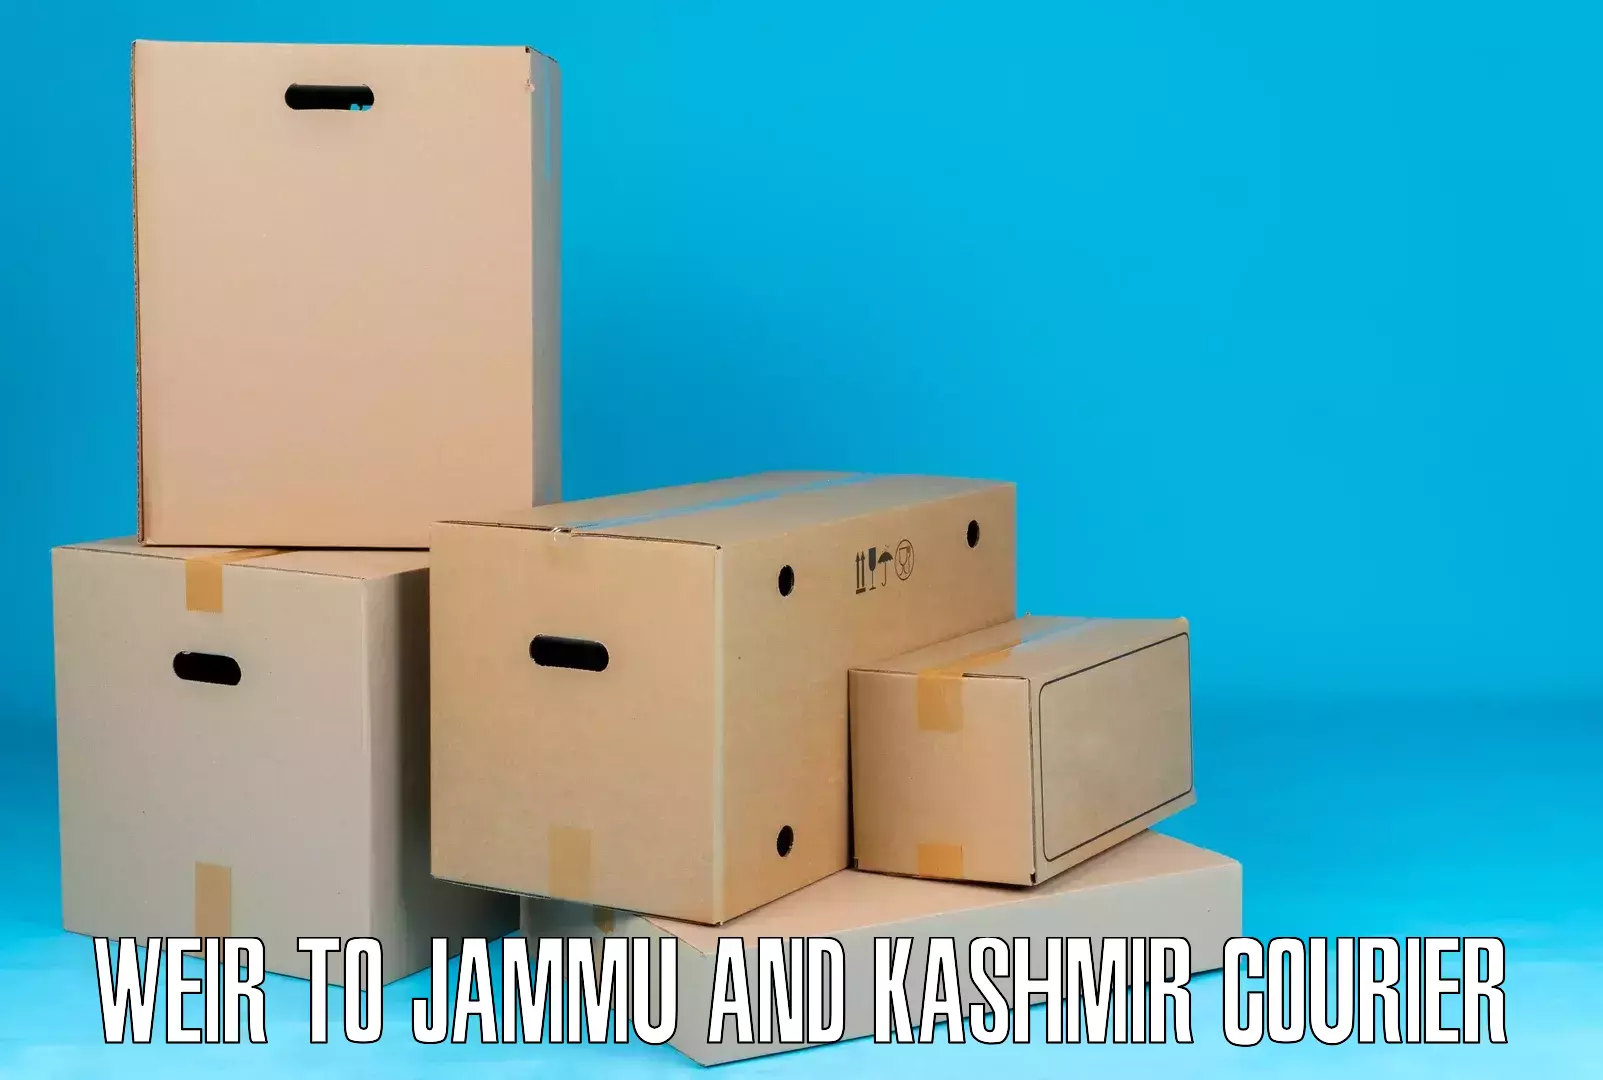 Pharmaceutical courier Weir to Jammu and Kashmir